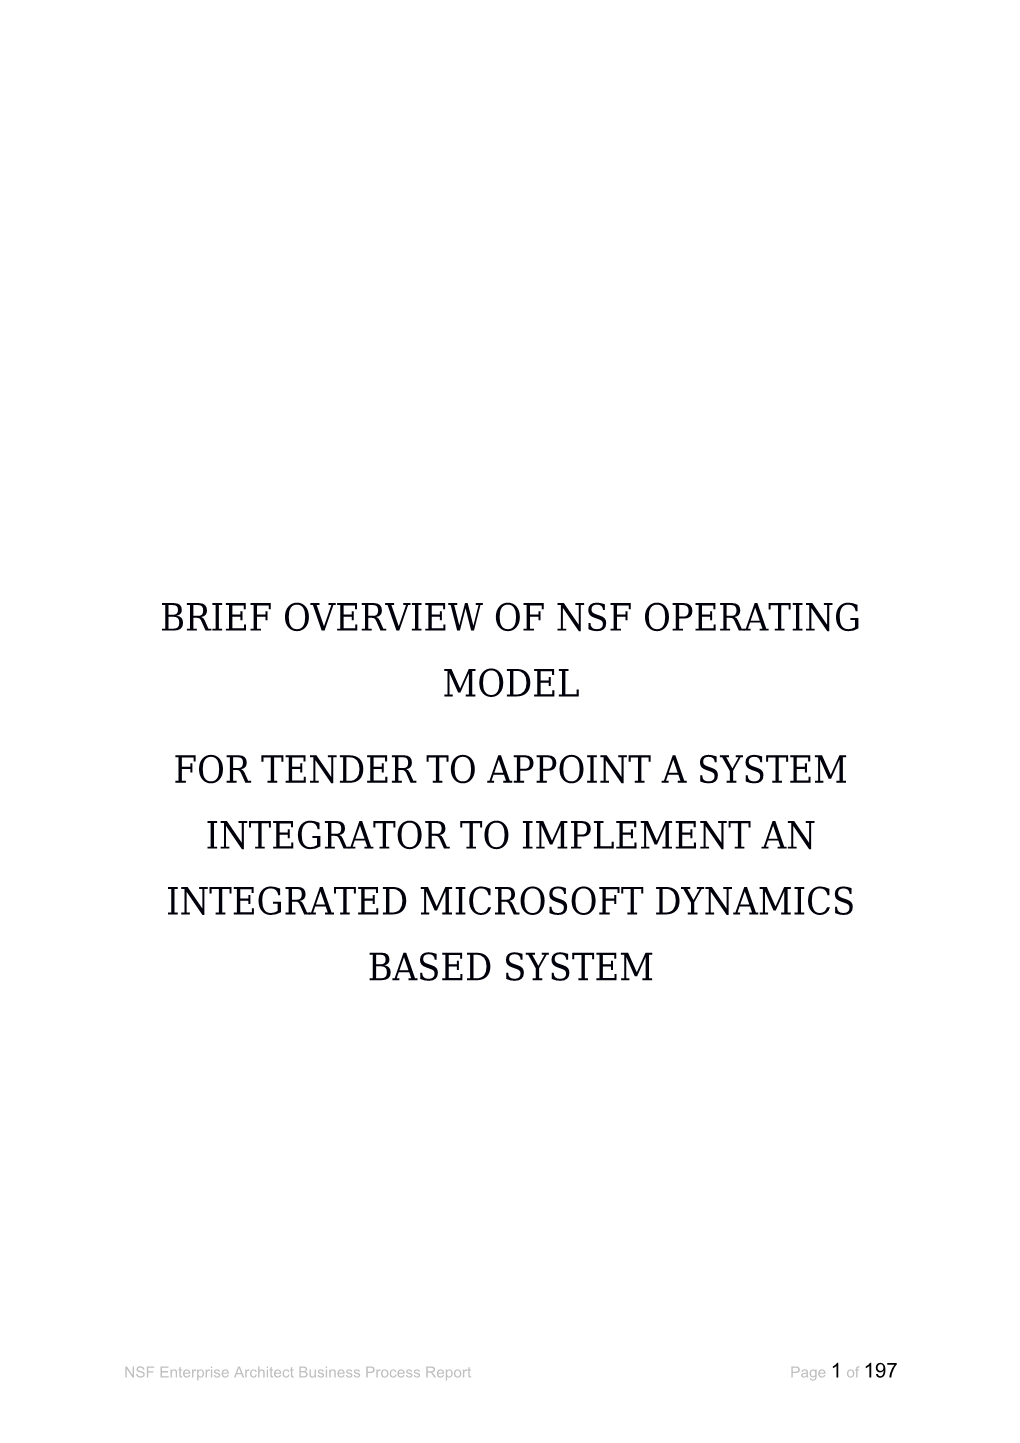 Brief Overview of Nsf Operating Model